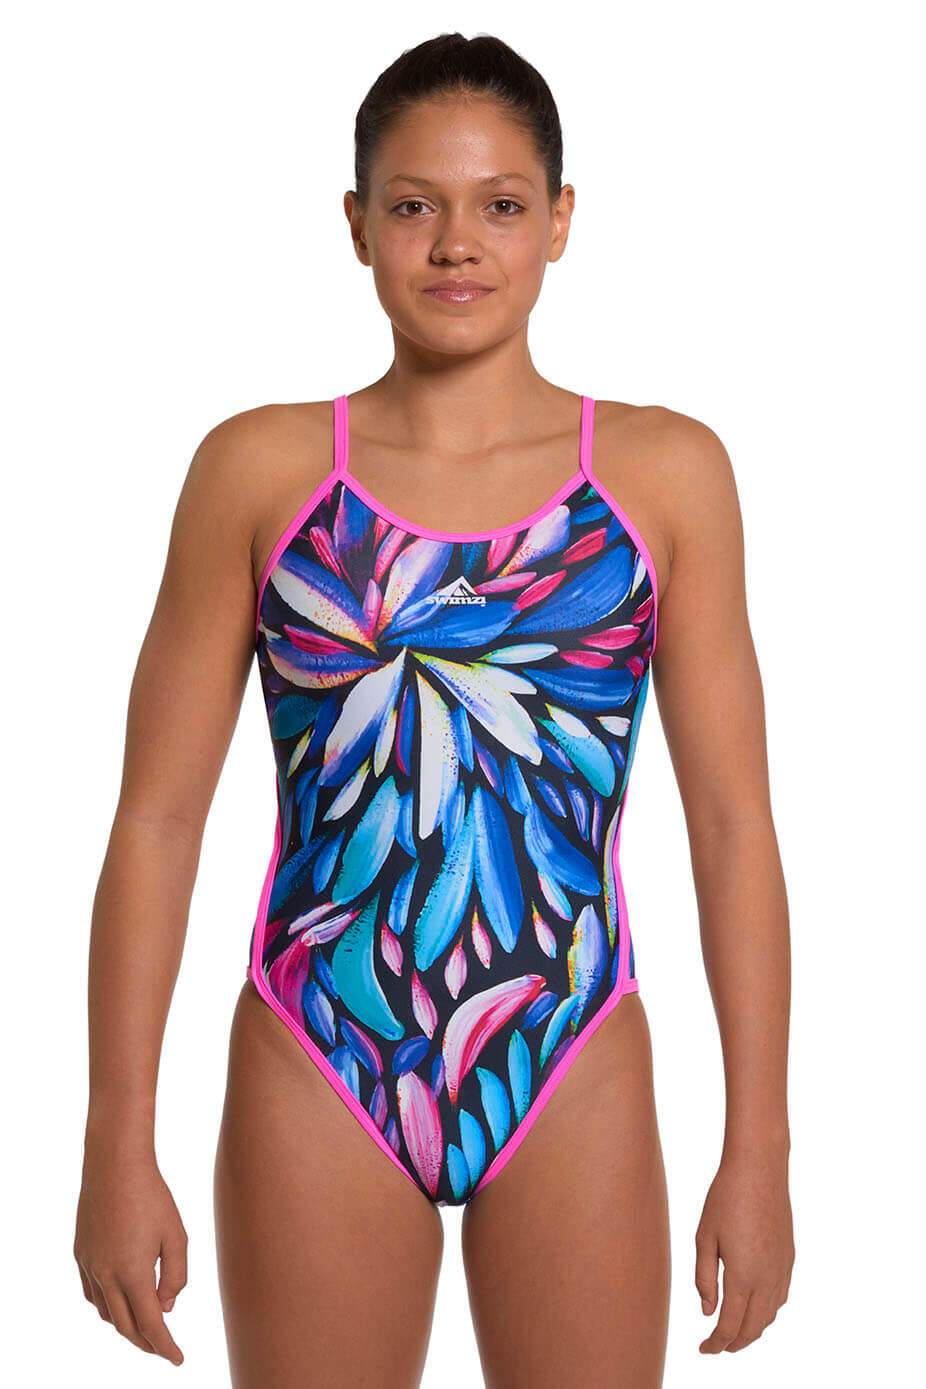 Swimzi Thin Strap Womens One-Piece swimsuit, Blue, Aqua, White and Pink Feathers 1/3